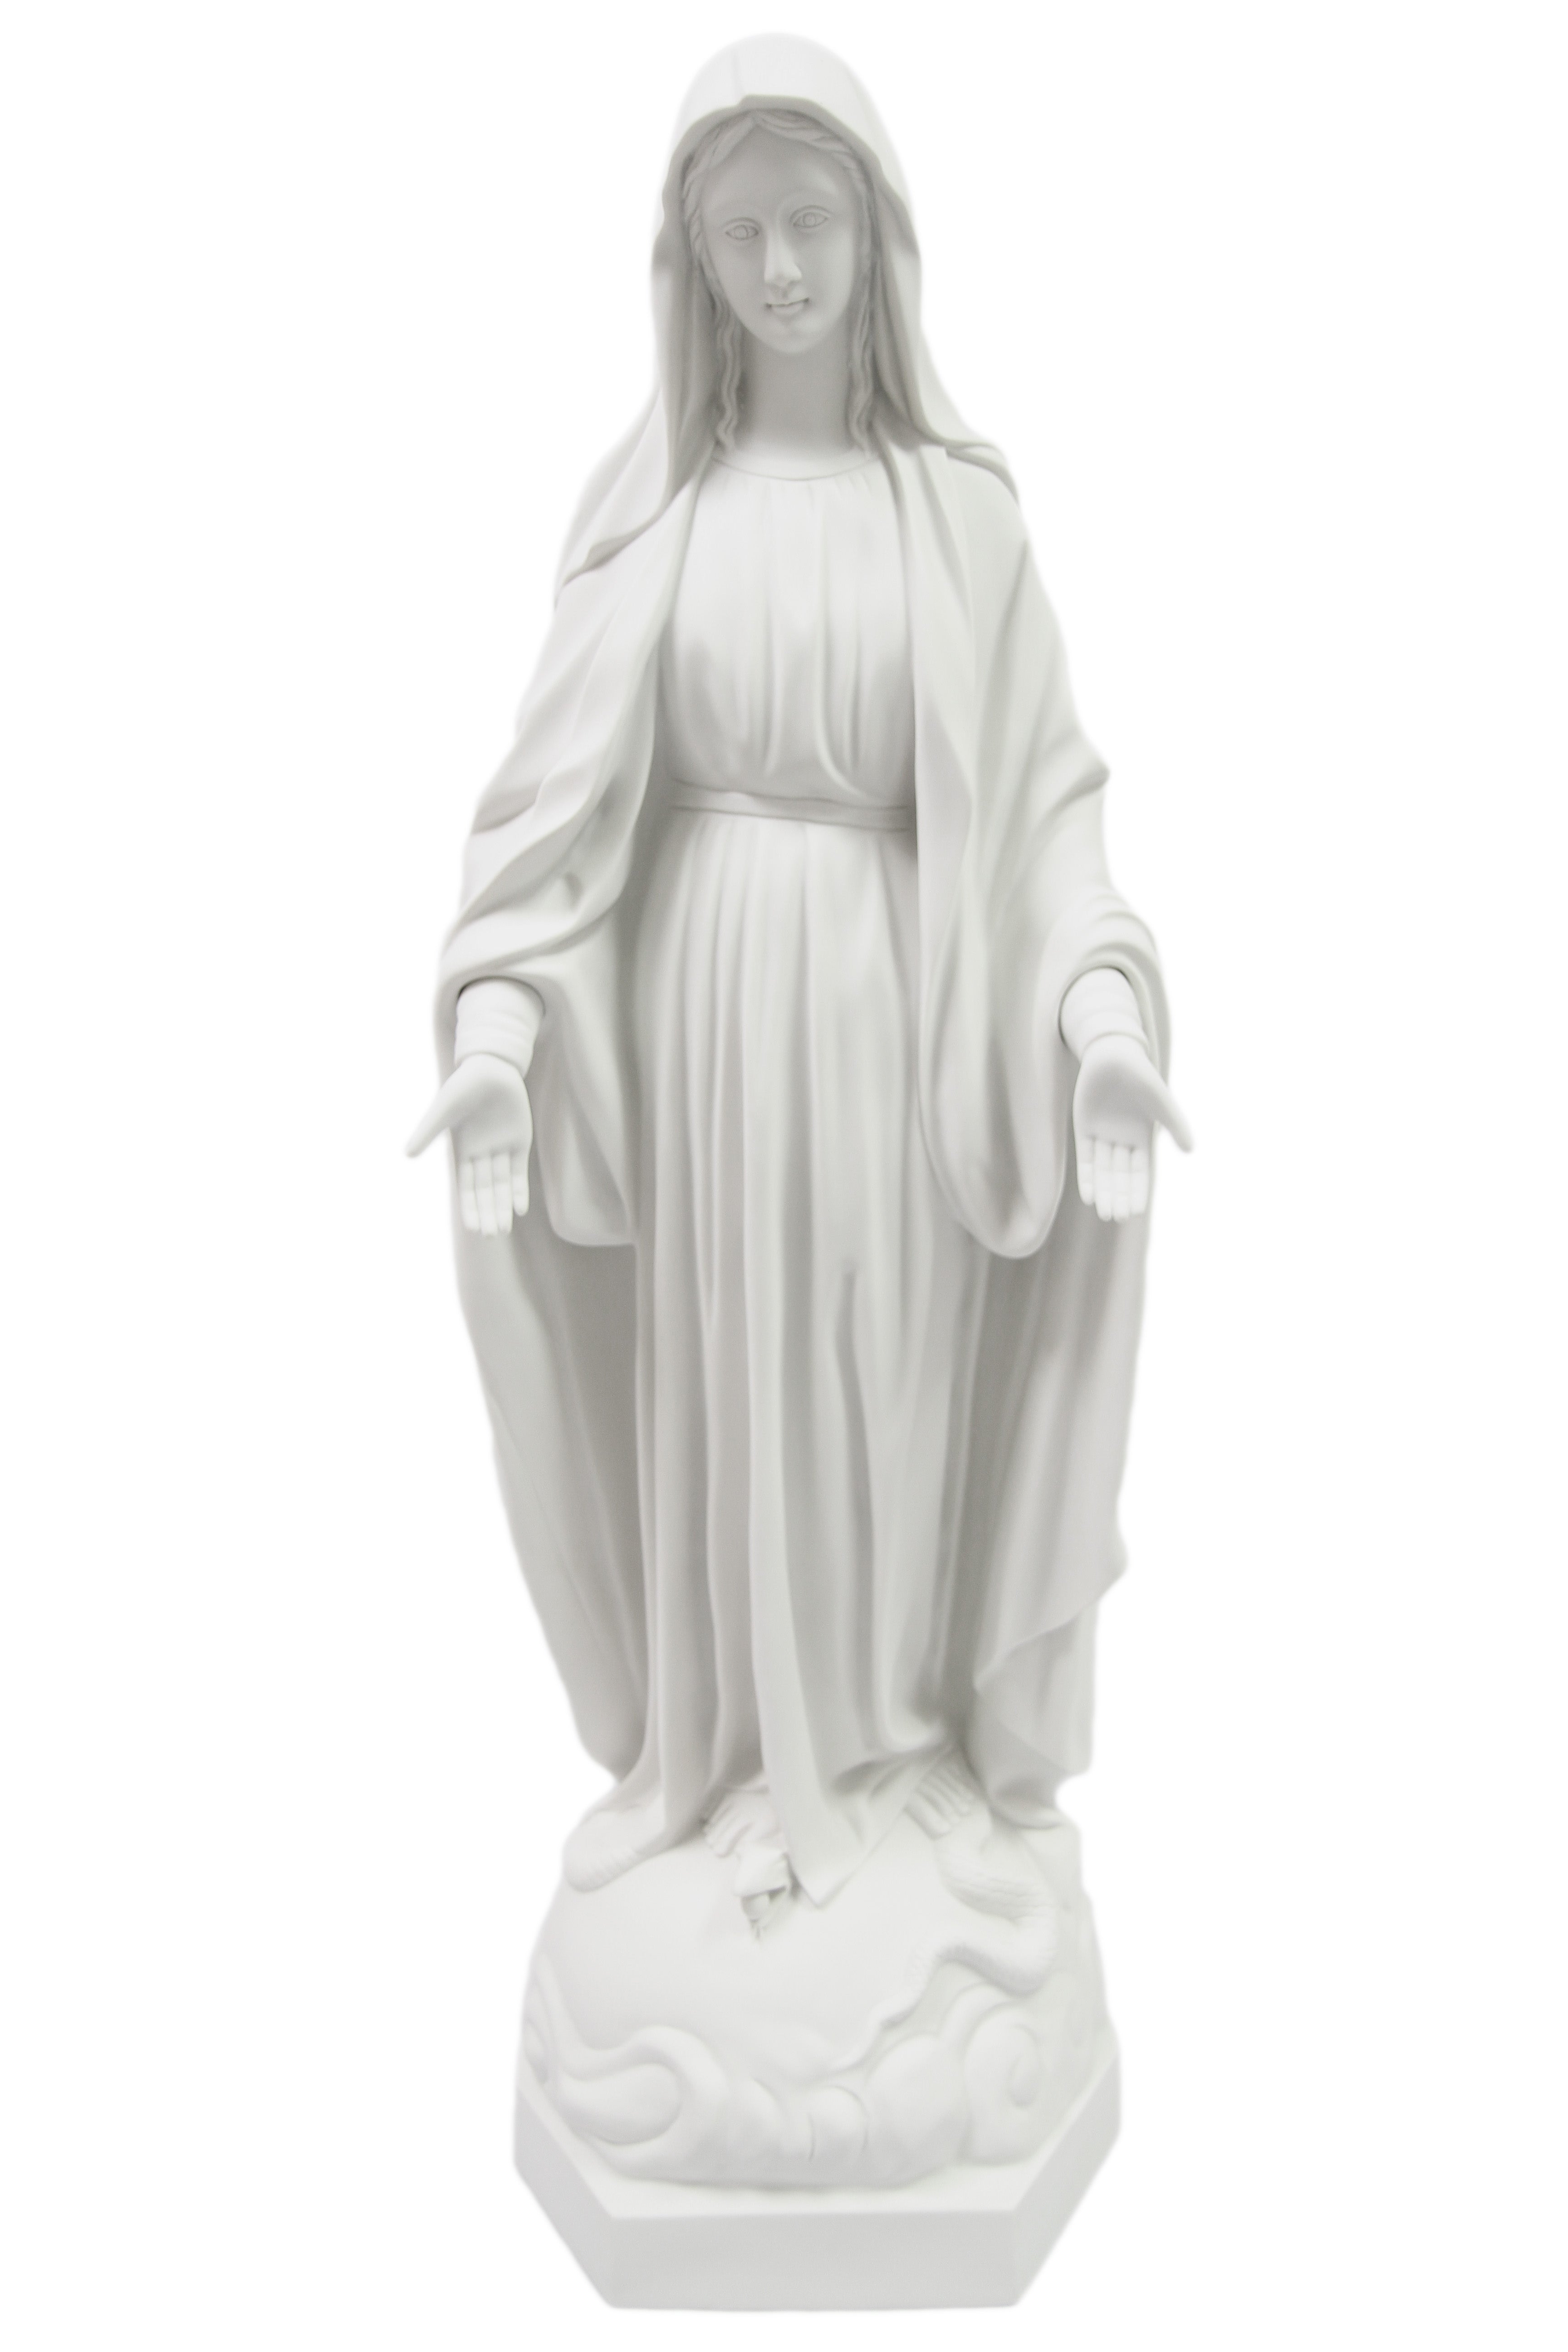 39 Inch Our Lady of Grace Virgin Mary Catholic Statue Vittoria Collection Made in Italy Indoor Outdoor Garden